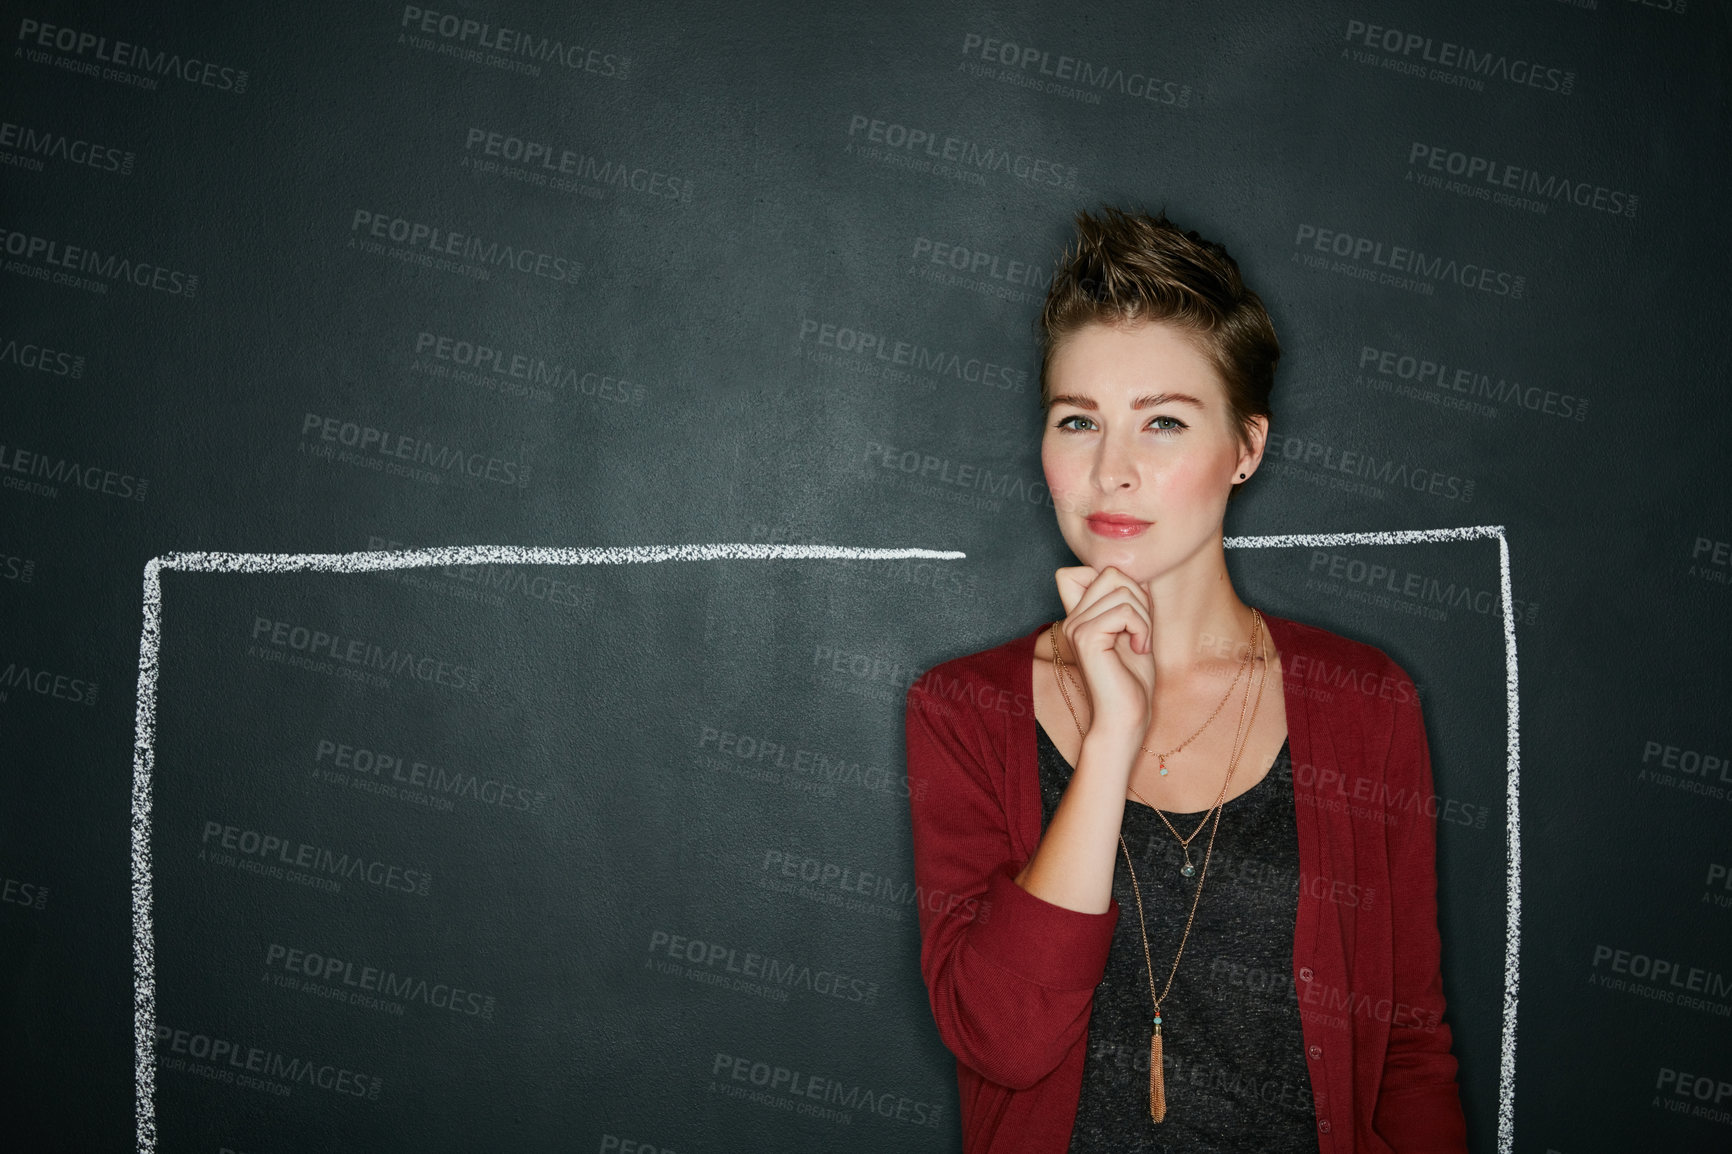 Buy stock photo Studio shot of a thoughtful young woman posing with a chalk illustration of a box against a dark background